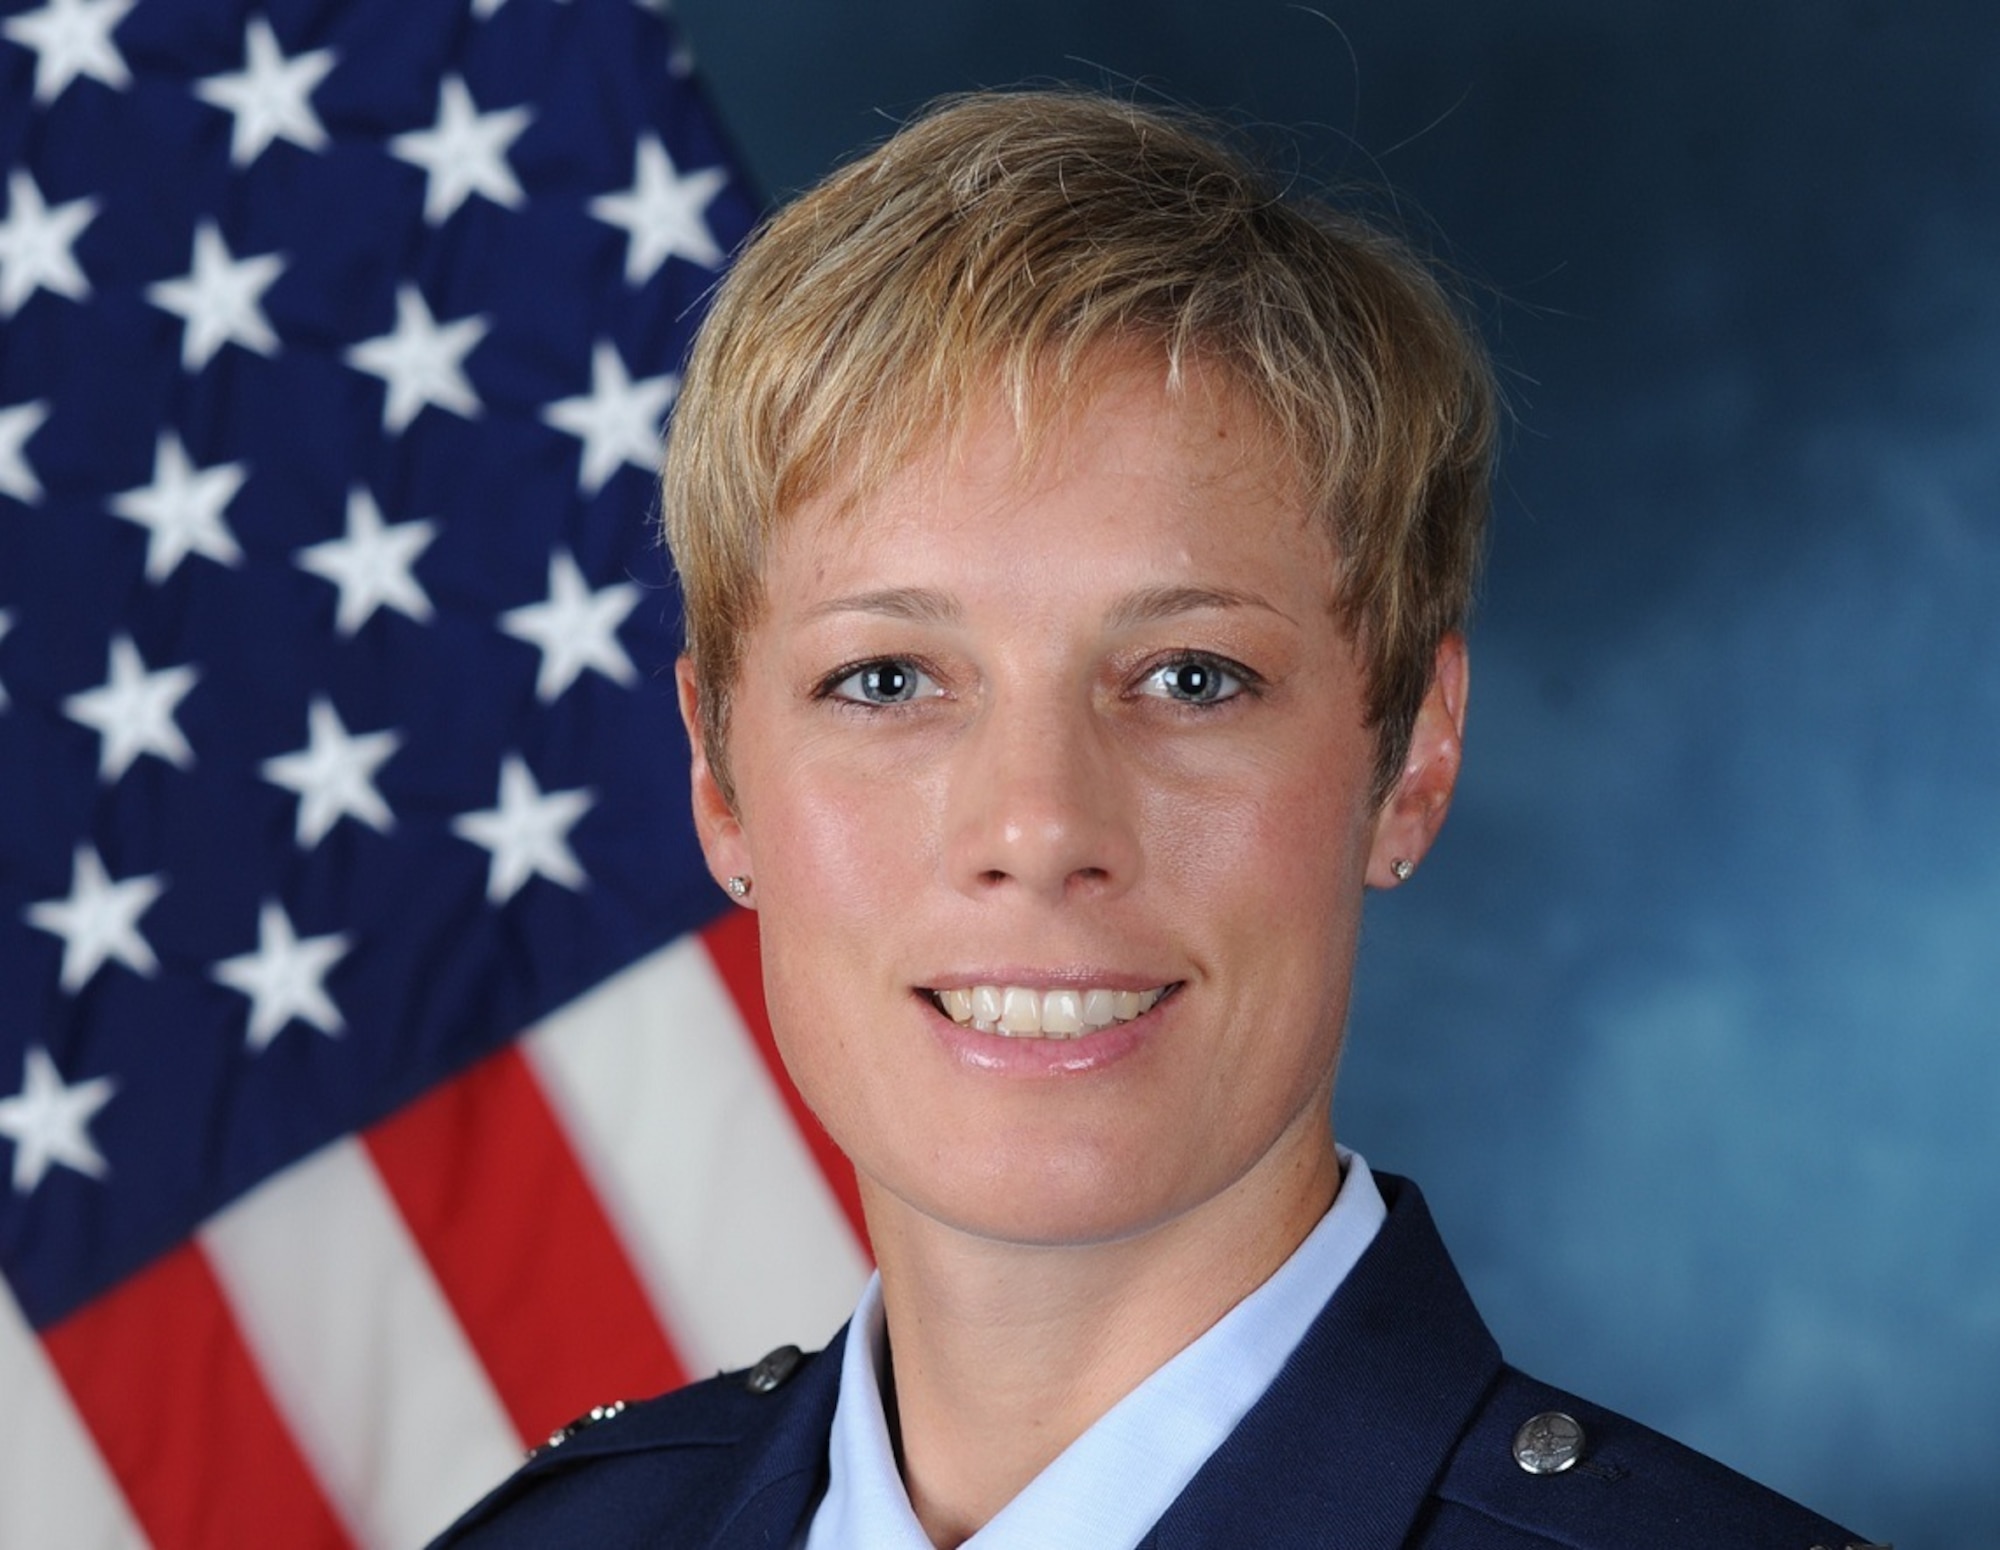 Brig. Gen. "select" Kristin Goodwin will assume command of the cadet wing at the U.S. Air Force Academy May 15, 2017. (U.S. Air Force photo)